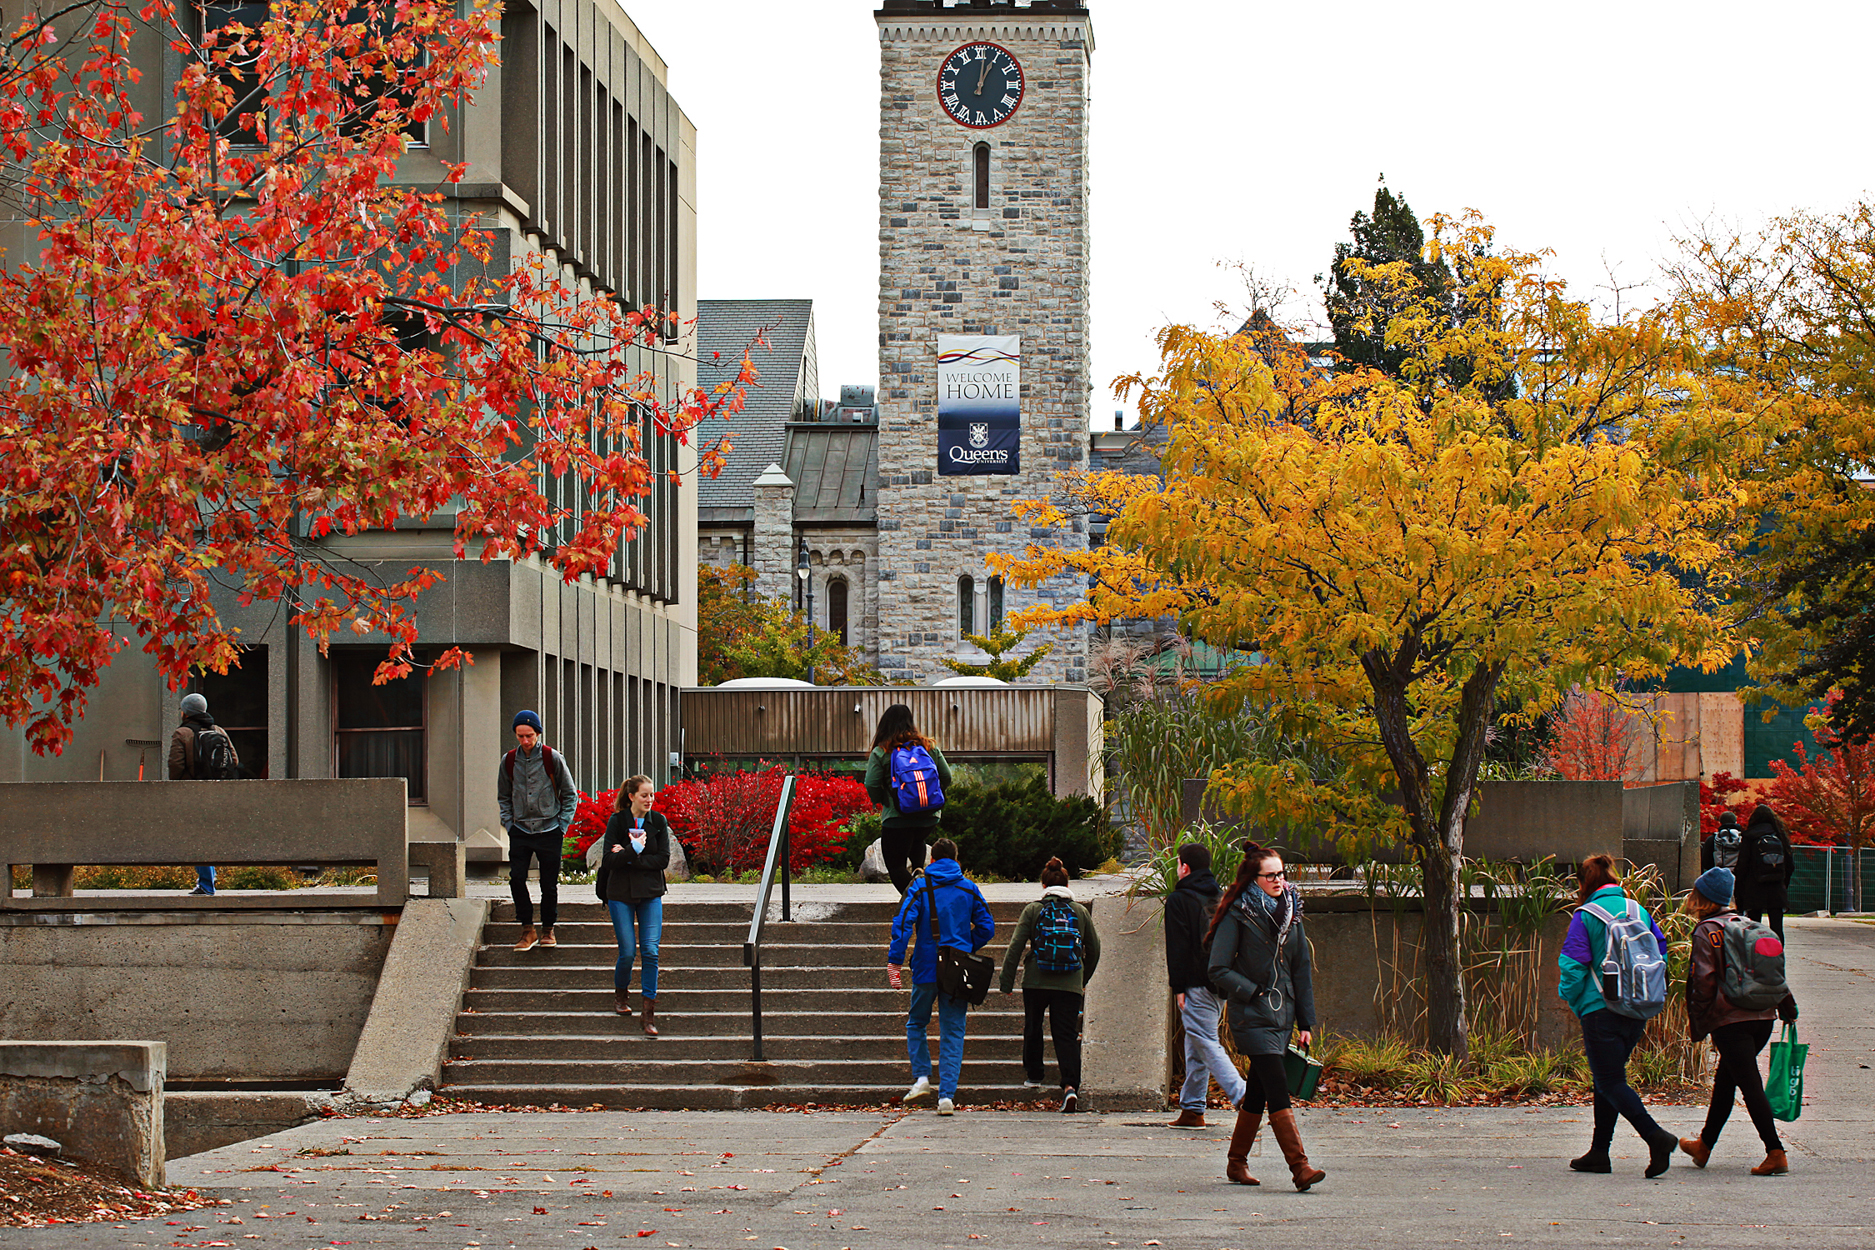 Students walking on Queen's campus in the winter. Grant Hall Tower in the background.